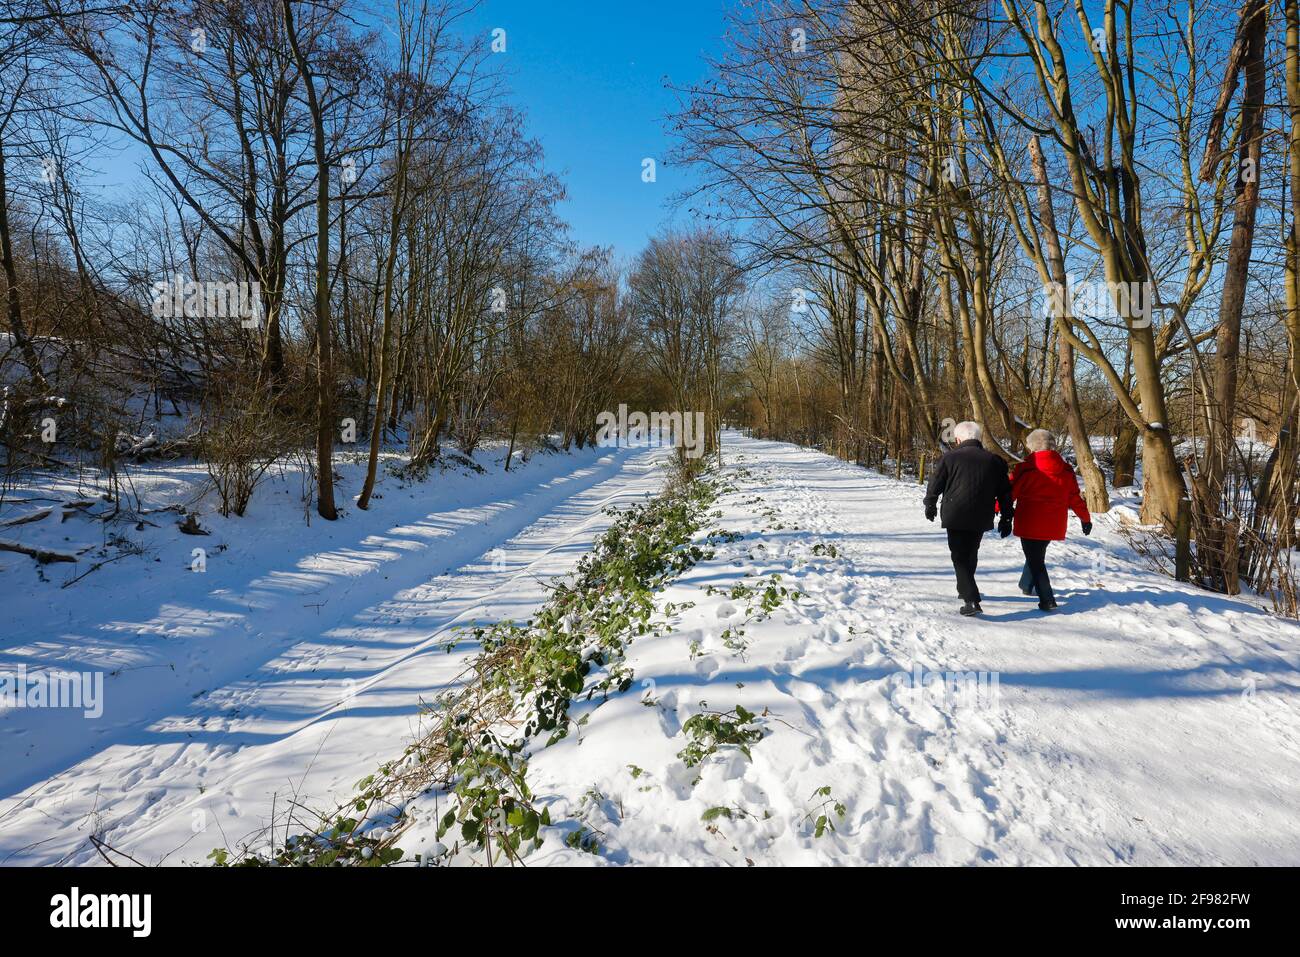 Bochum, North Rhine-Westphalia, Germany - Sunny winter landscape in the Ruhr area, walkers in ice and snow on the renatured Hofsteder Bach, the brook has been transformed into a natural body of water, the Hofsteder Bach flows over the Hüller Bach into the Emscher, belongs to the Emscher and river system thus for the Emscher conversion, there was previously an open, above-ground wastewater canal, mixed water canal with surface water and sewage. Stock Photo